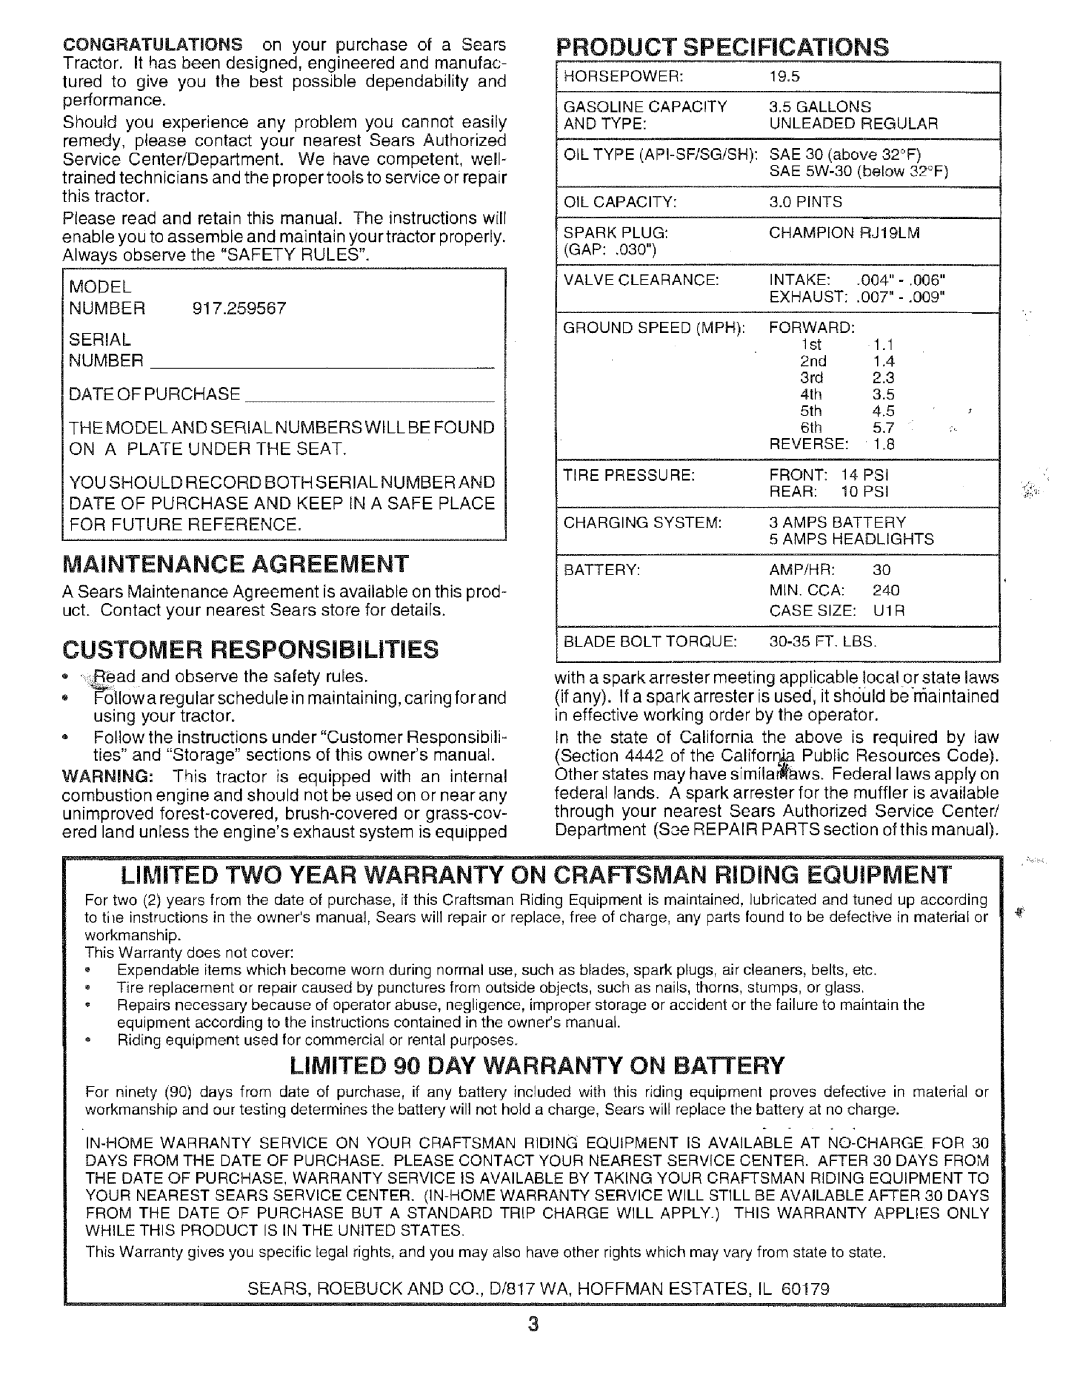 Sears 917.259567 owner manual Maintenance Agreement, Customer Responsibilities, Product Specifications 